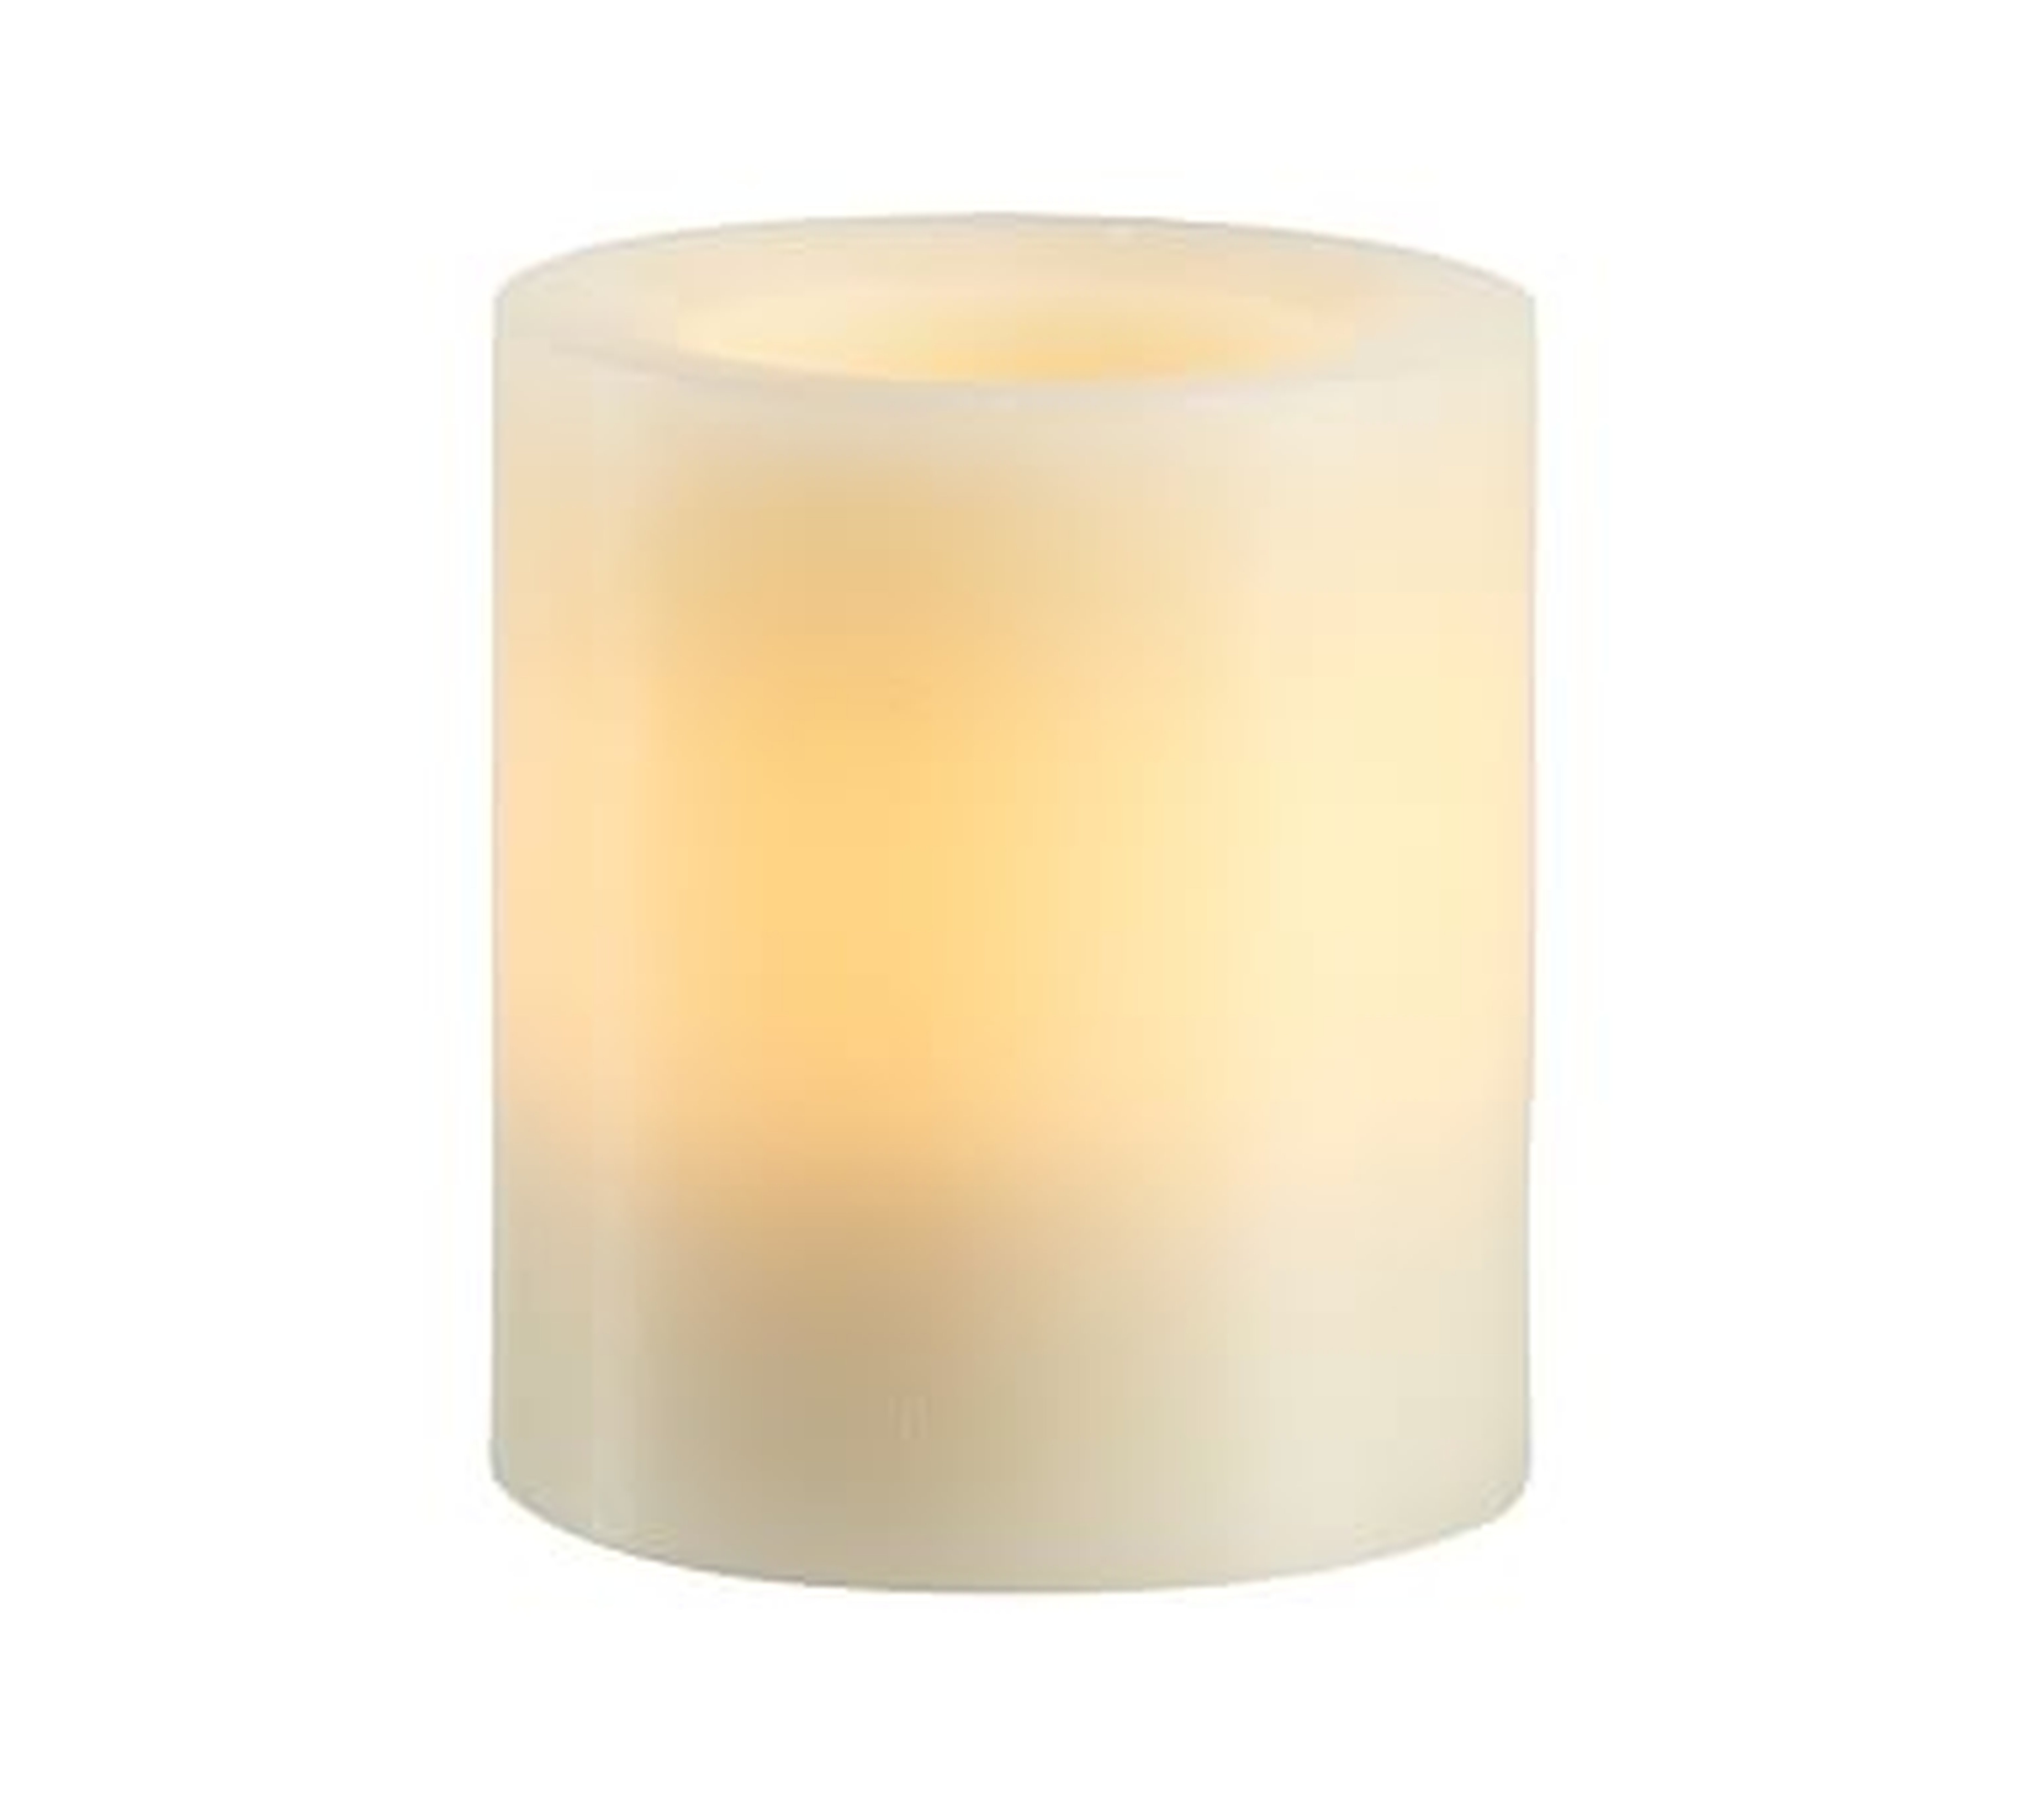 Standard Flameless Wax Candle, 4"x4.5" - Ivory - Pottery Barn